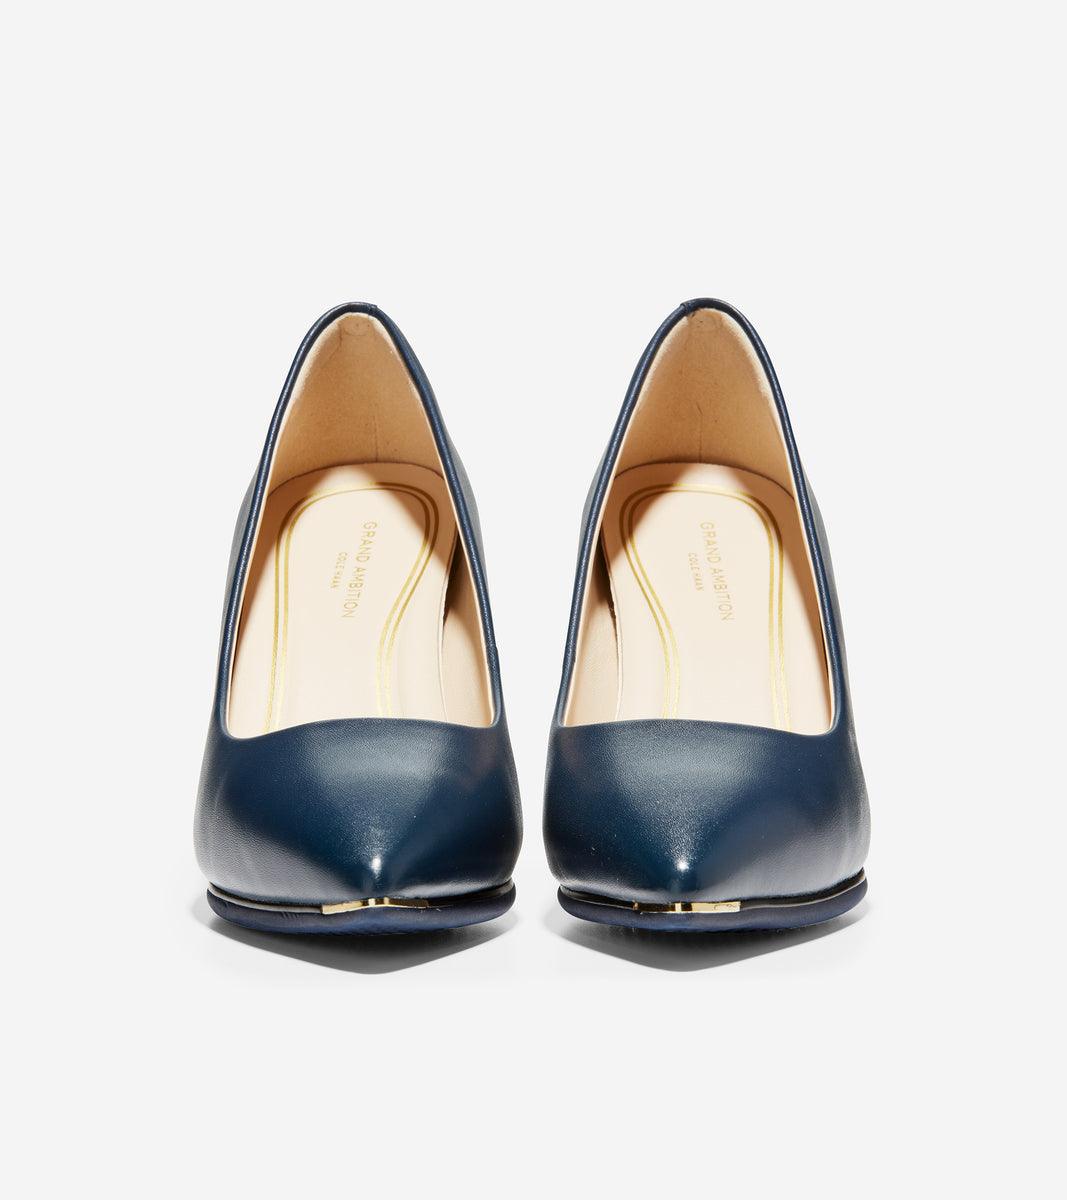 ColeHaan-Grand Ambition Pump-w18725-Marine Blue Leather